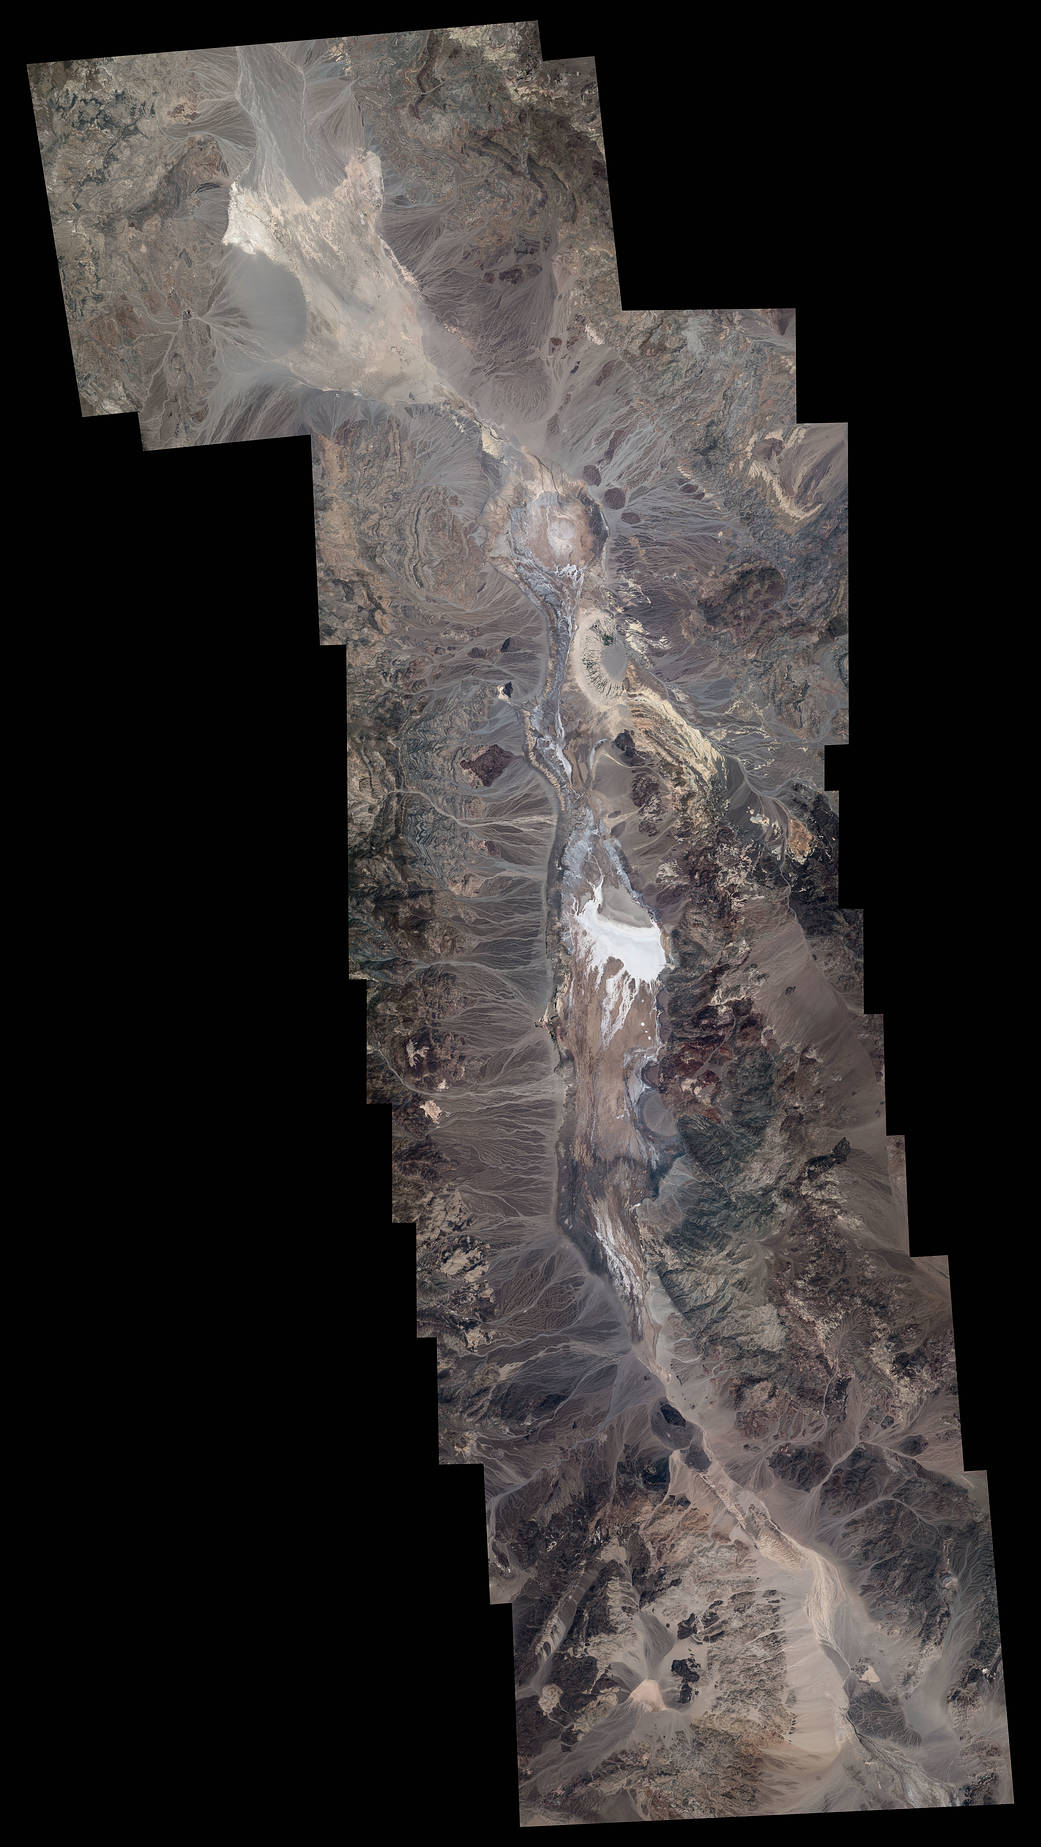 Death Valley National Park from low Earth orbit